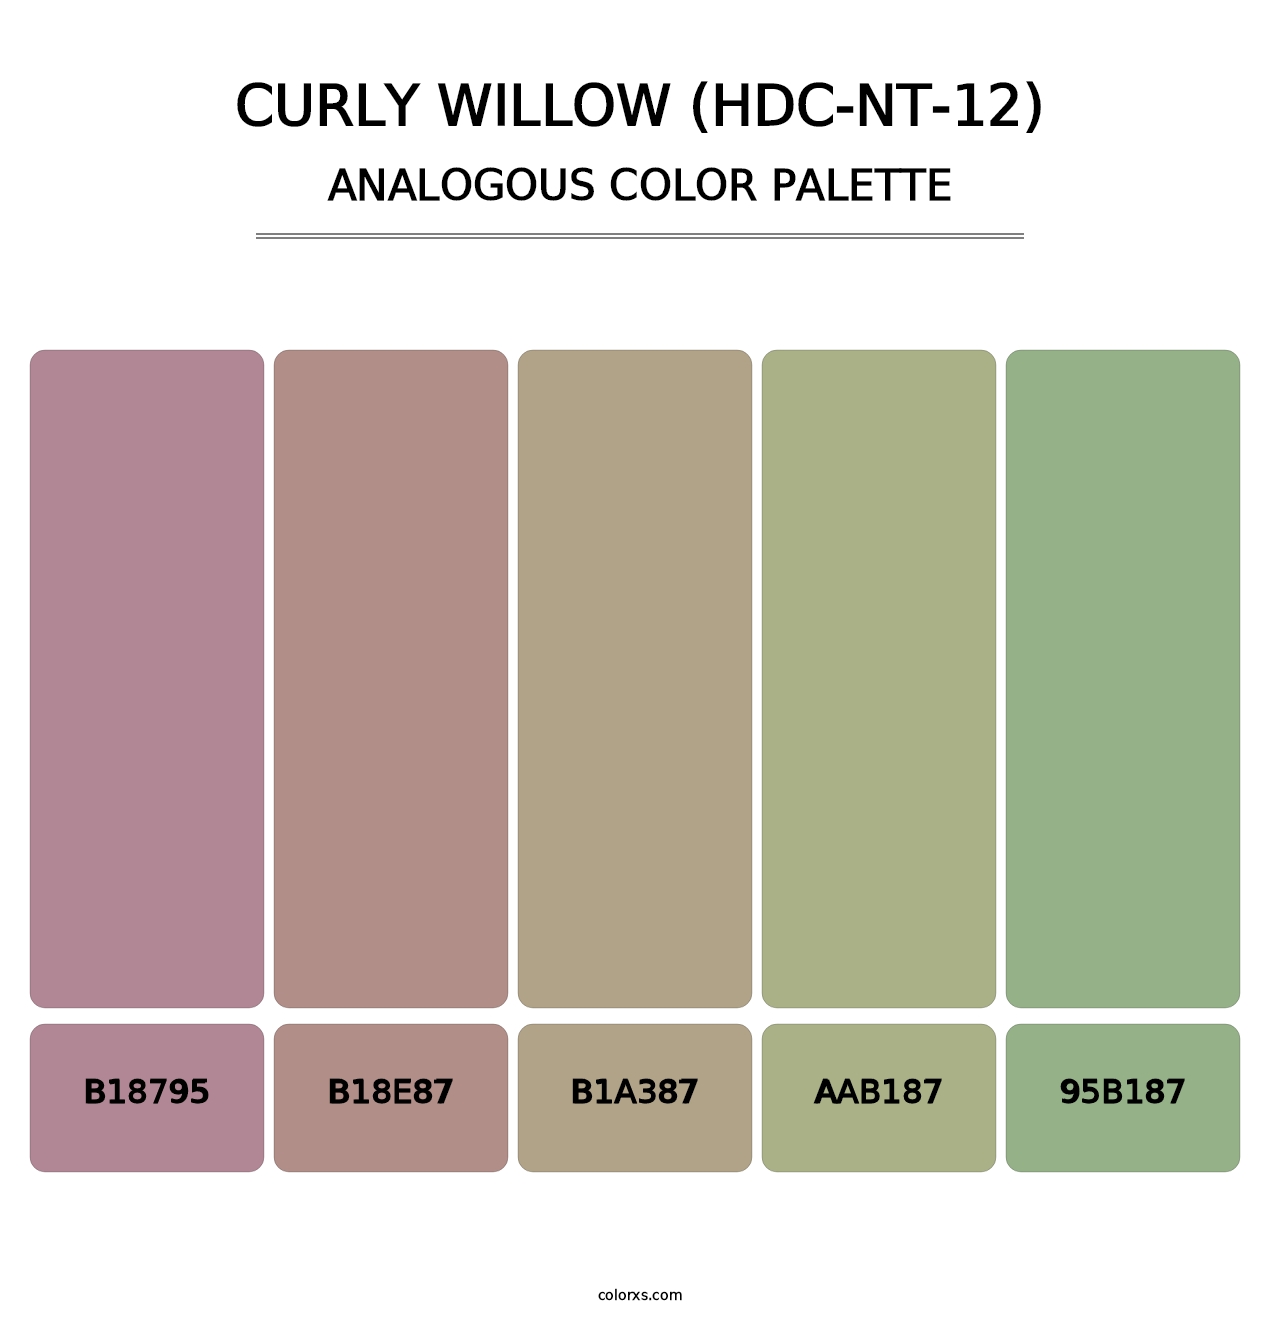 Curly Willow (HDC-NT-12) - Analogous Color Palette